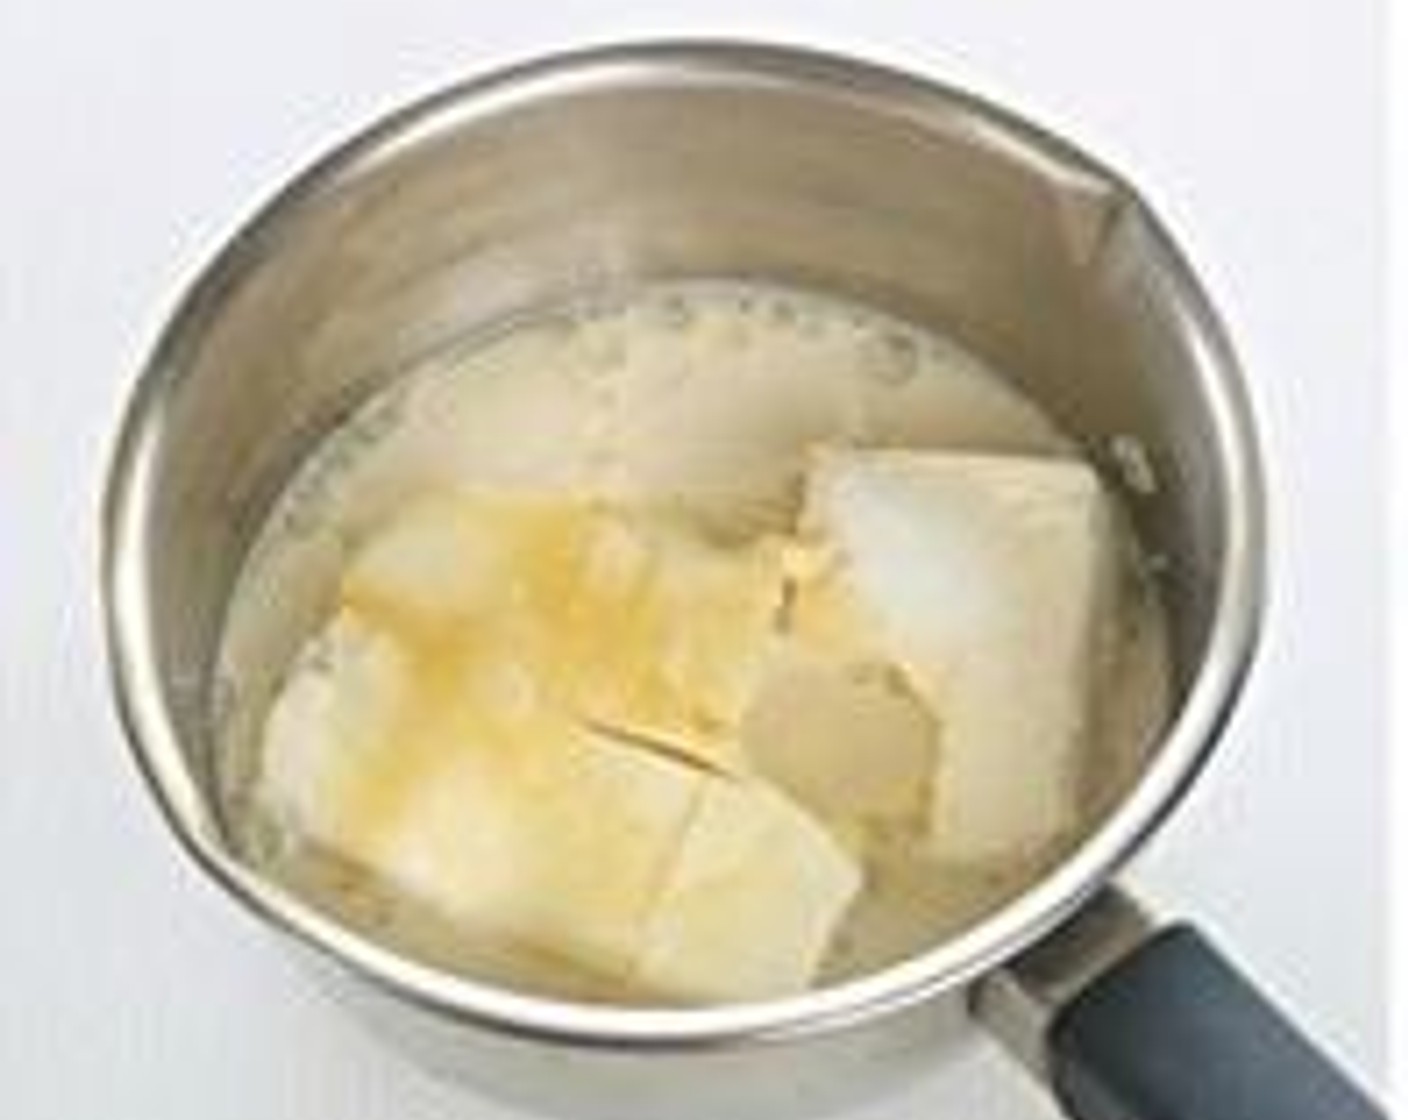 step 1 Place Philadelphia Original Soft Cheese (1 cup), Corn Oil (2 1/2 Tbsp), Caster Sugar (3 Tbsp), Honey (2 Tbsp) and Milk (1/3 cup) in a bowl under double boiler and stir mixture till melted. Then pass mixture through a sieve into a large bowl.